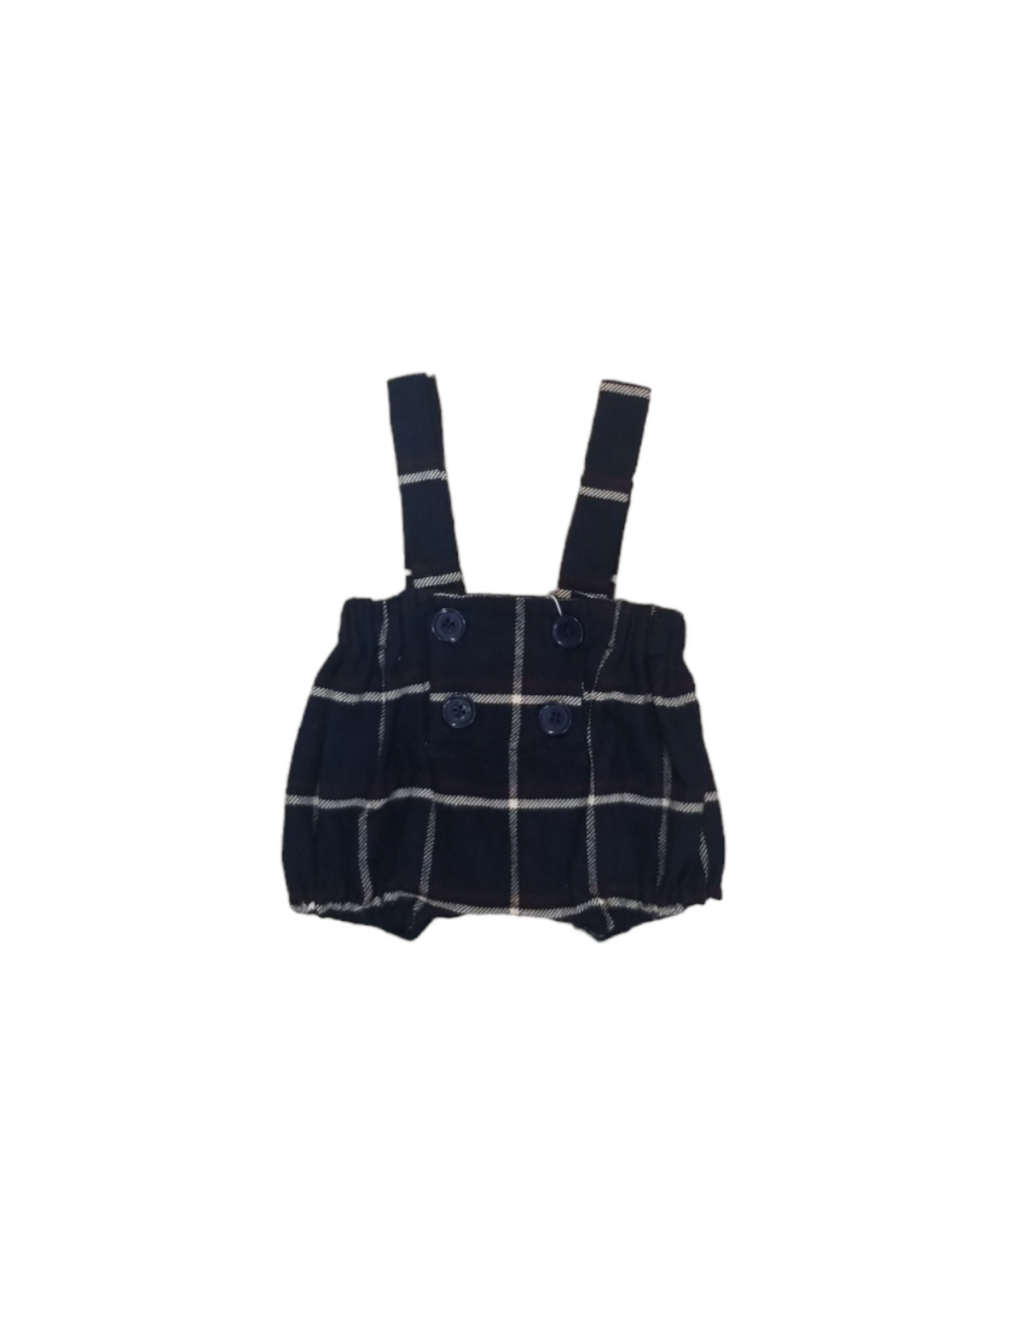 Pernille Joelle Bloomers With Suspenders - Blue/plaid